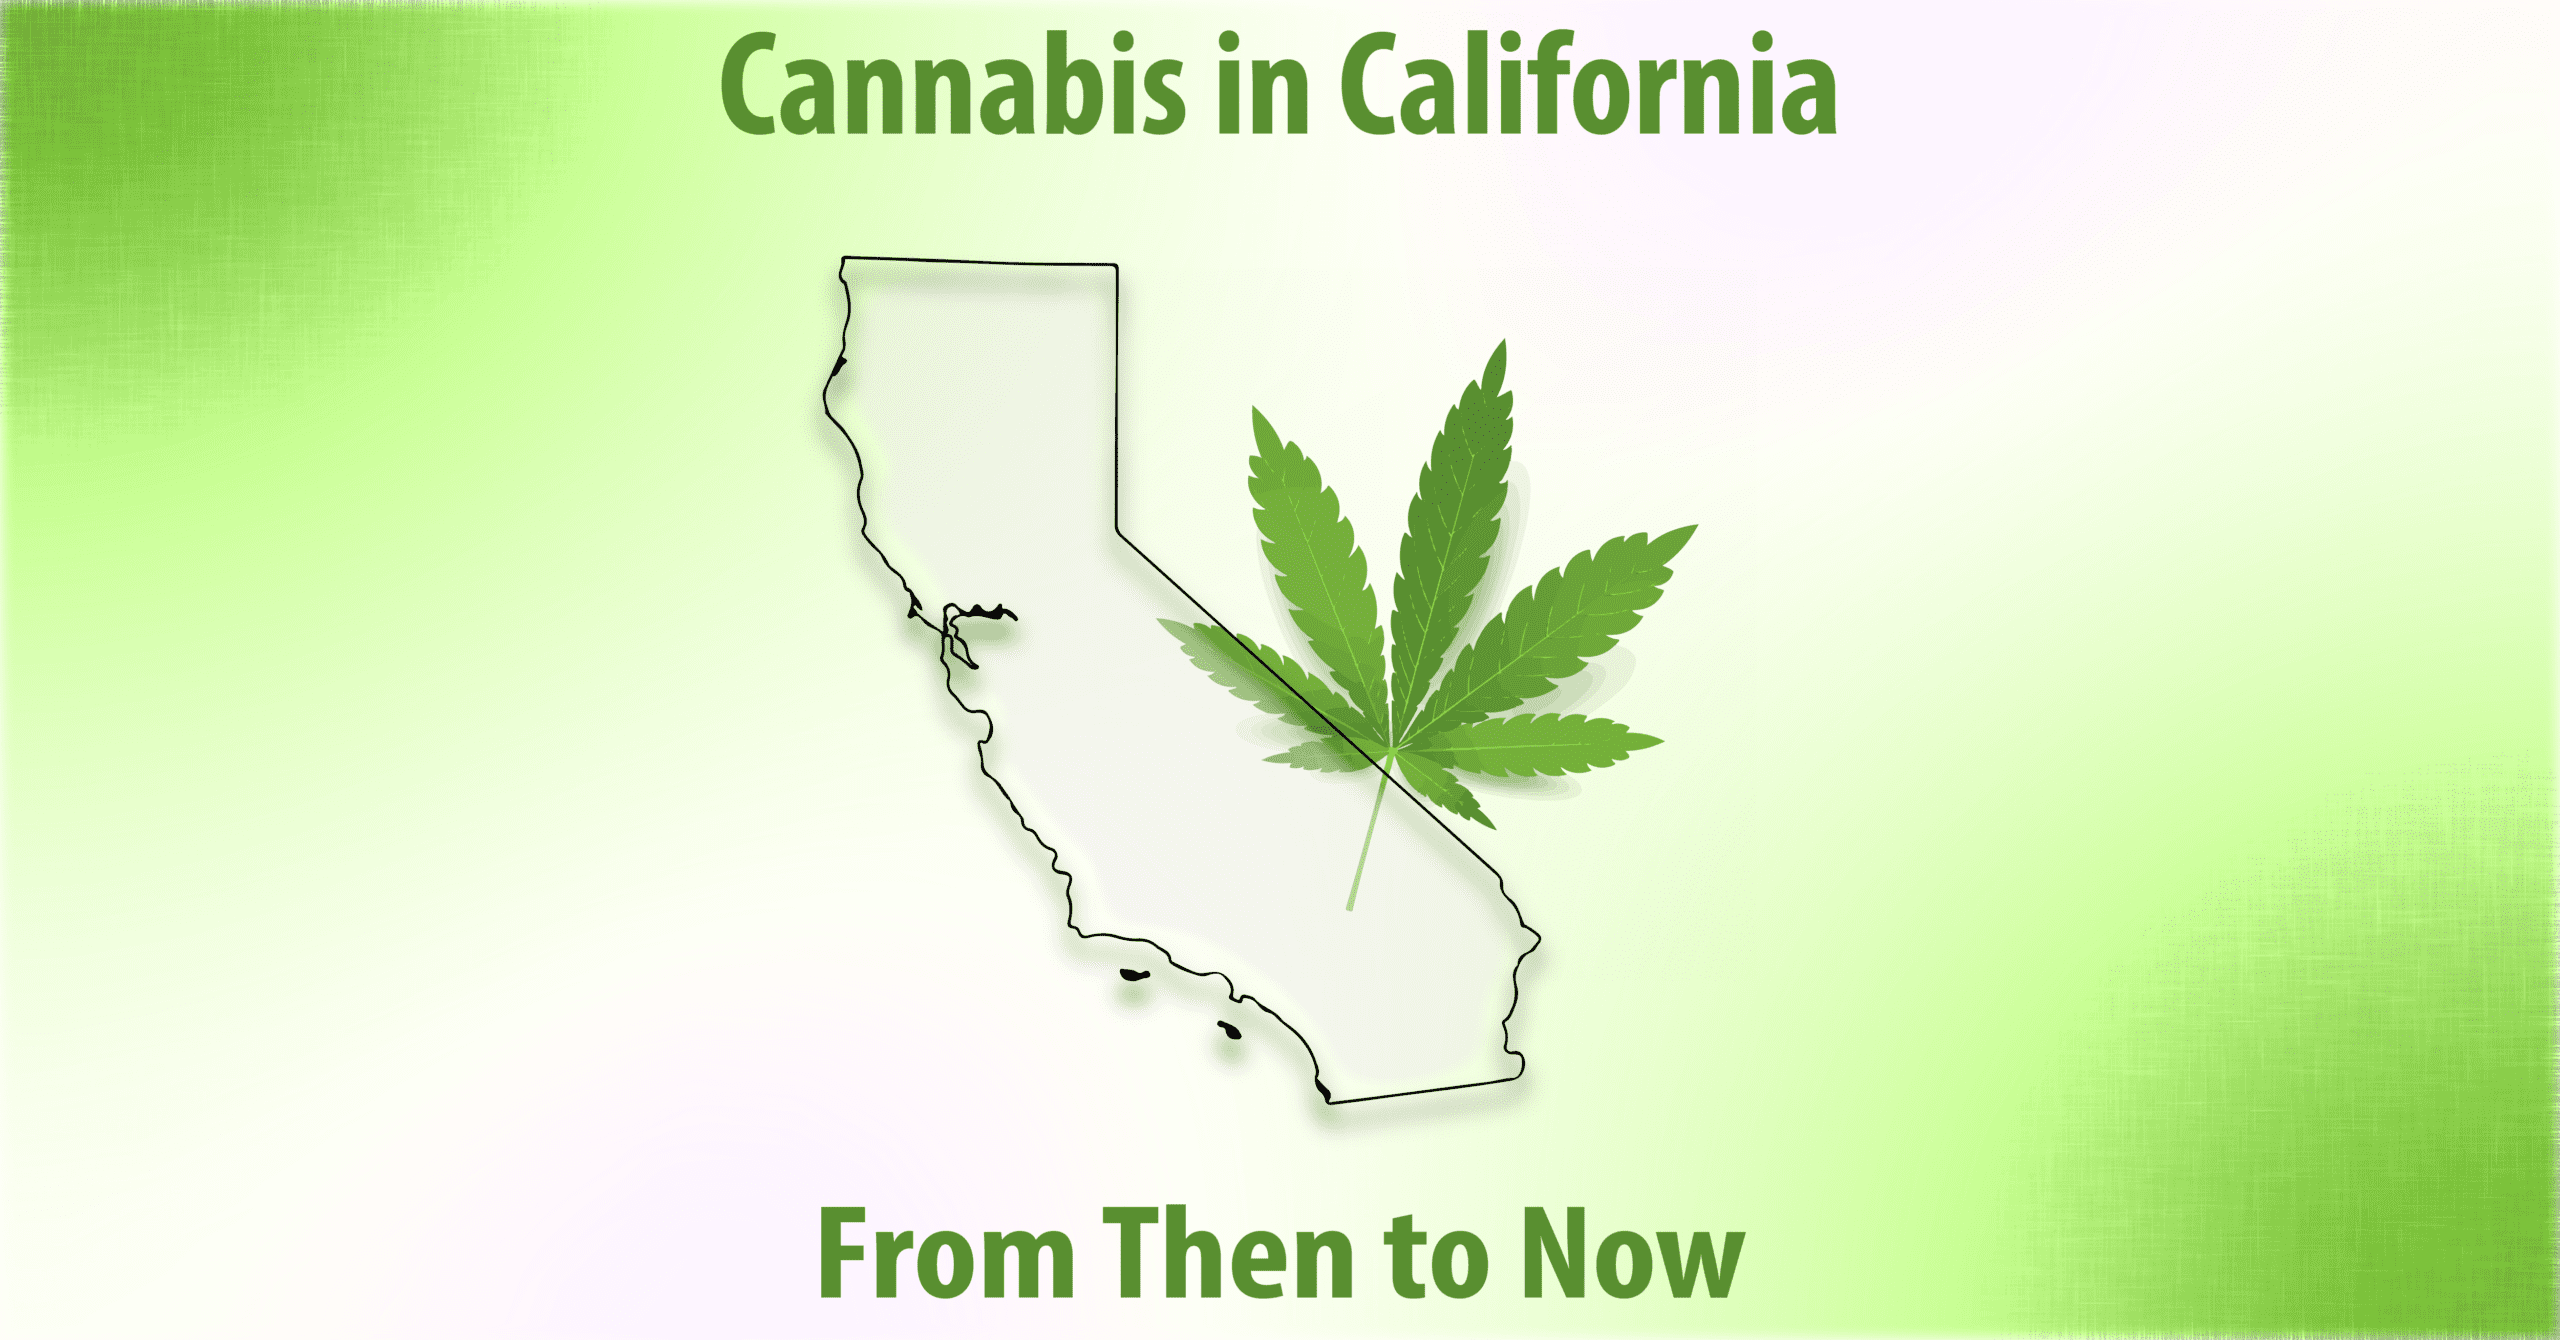 Cannabis in California: From Then to Now